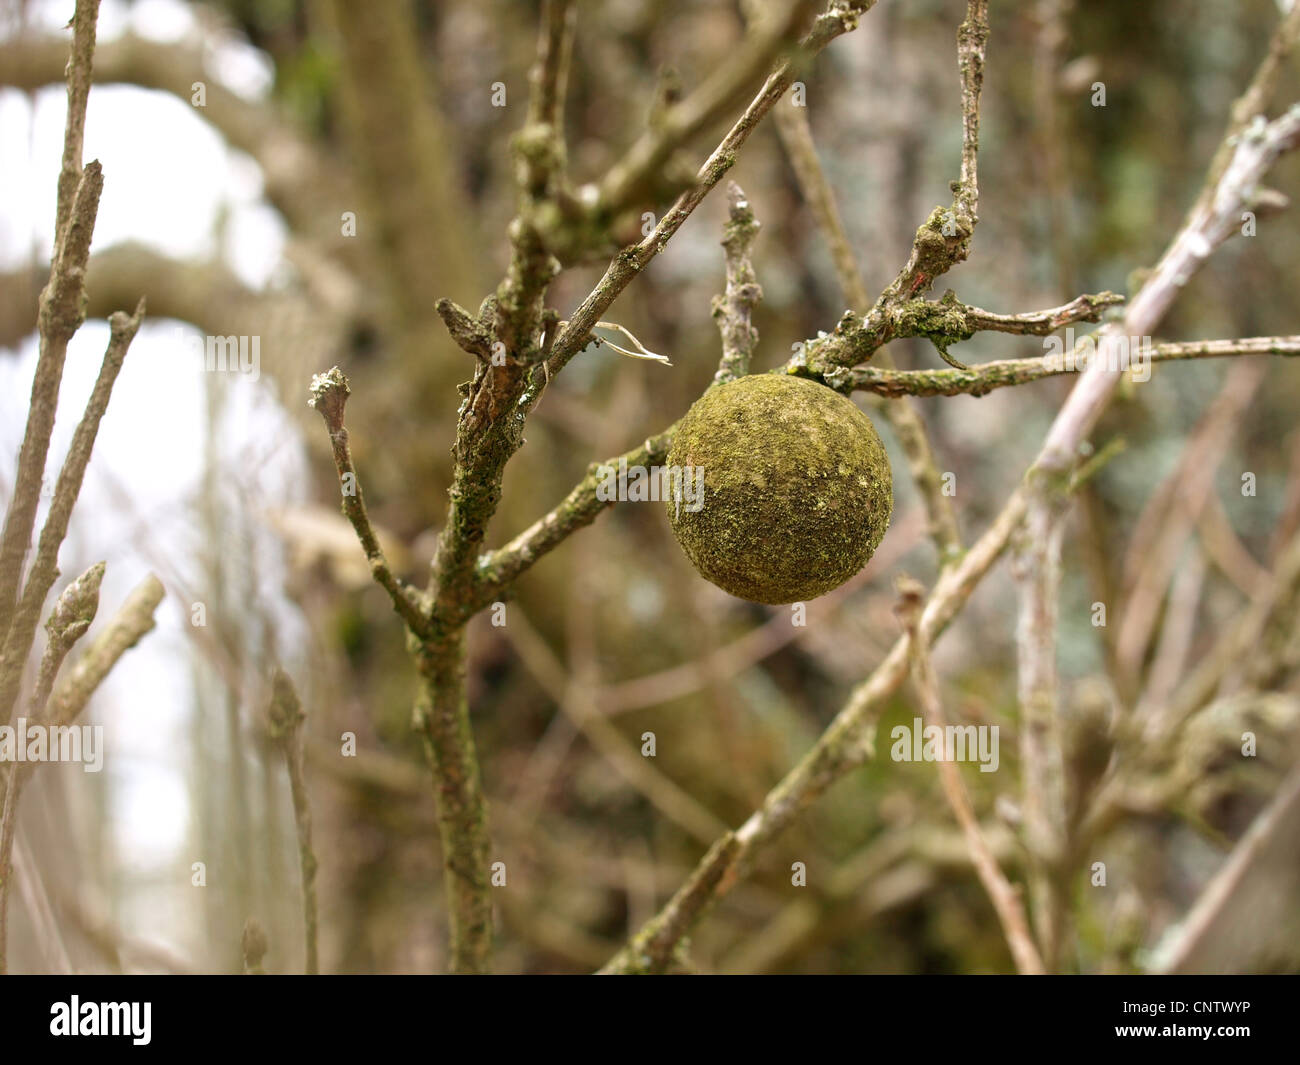 a round ball on an oak tree, large vaguely apple-like gall, oak apple / Gallapfel an Eiche Stock Photo